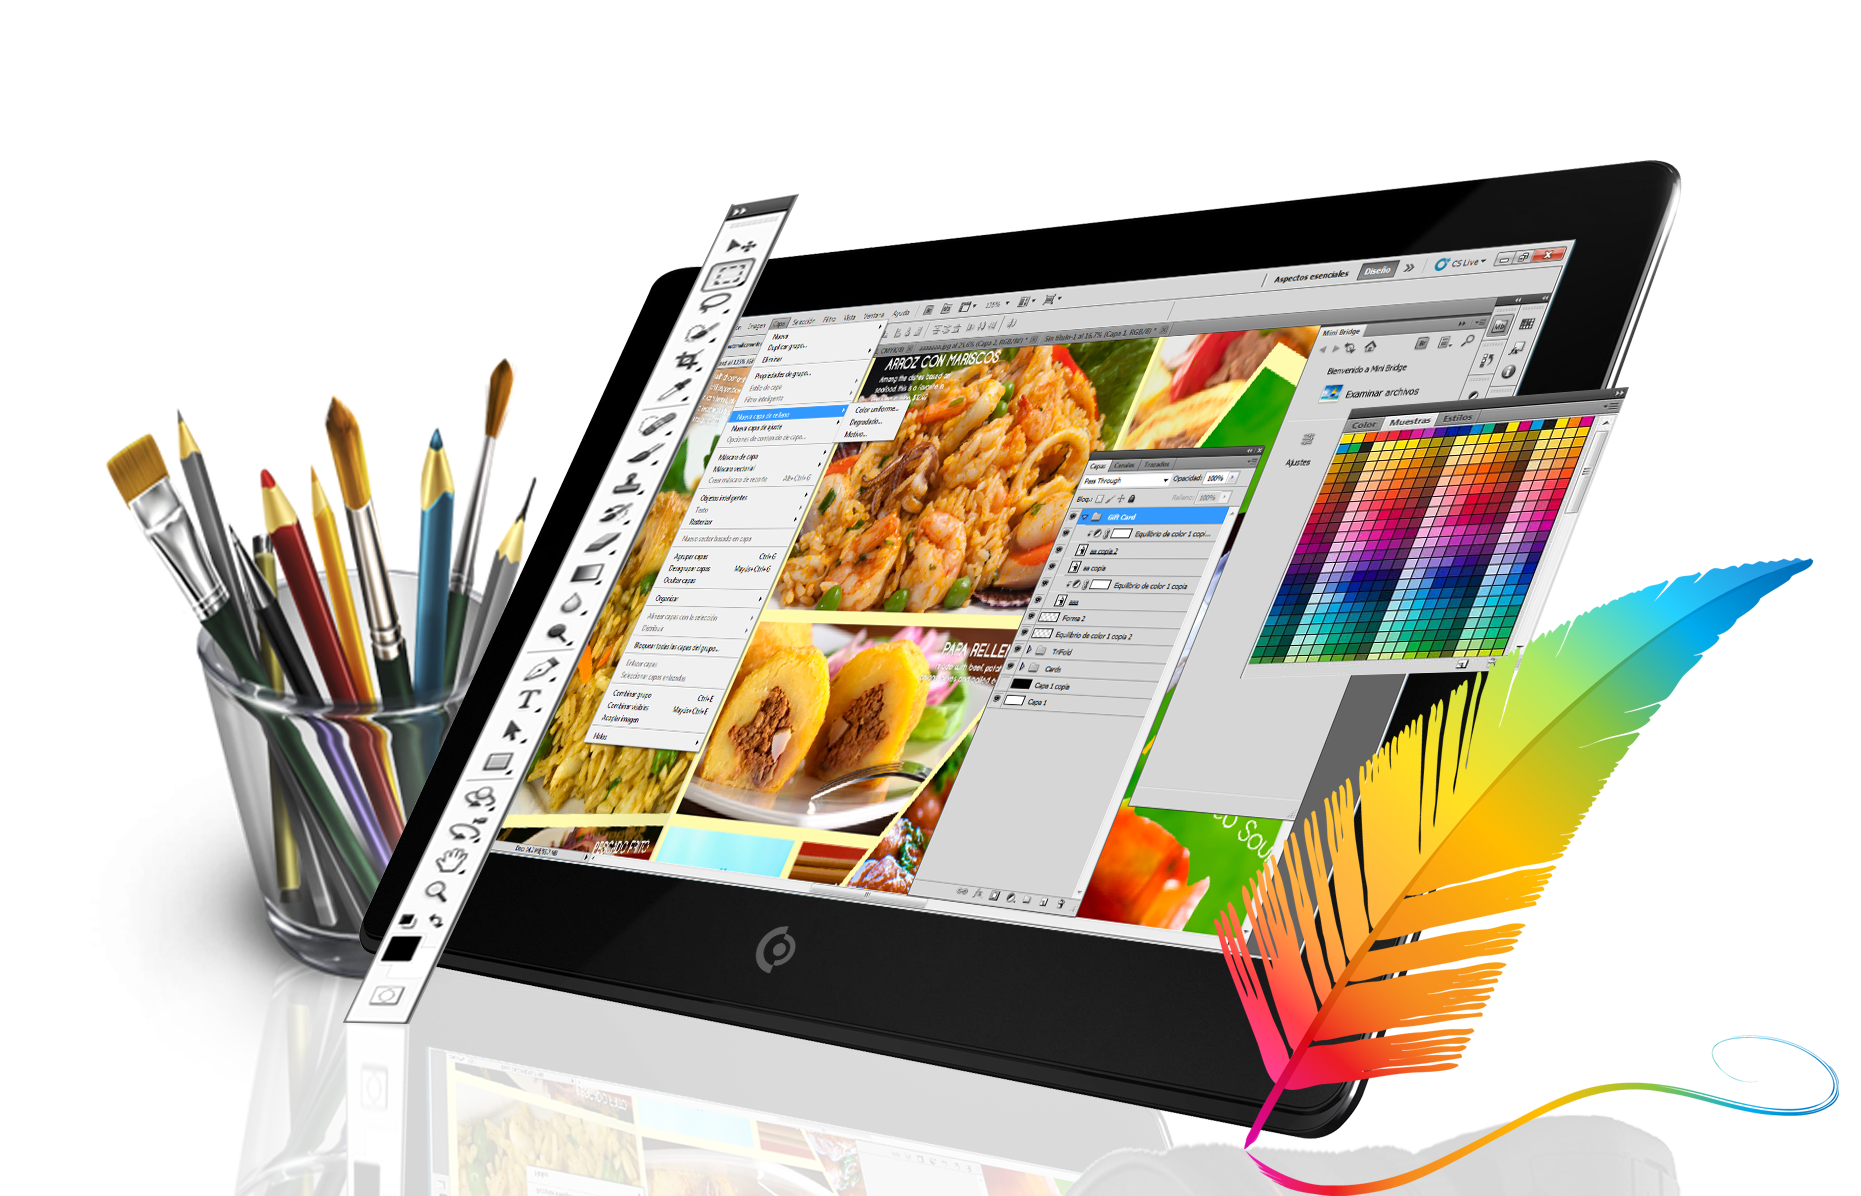 ps graphic design software free download